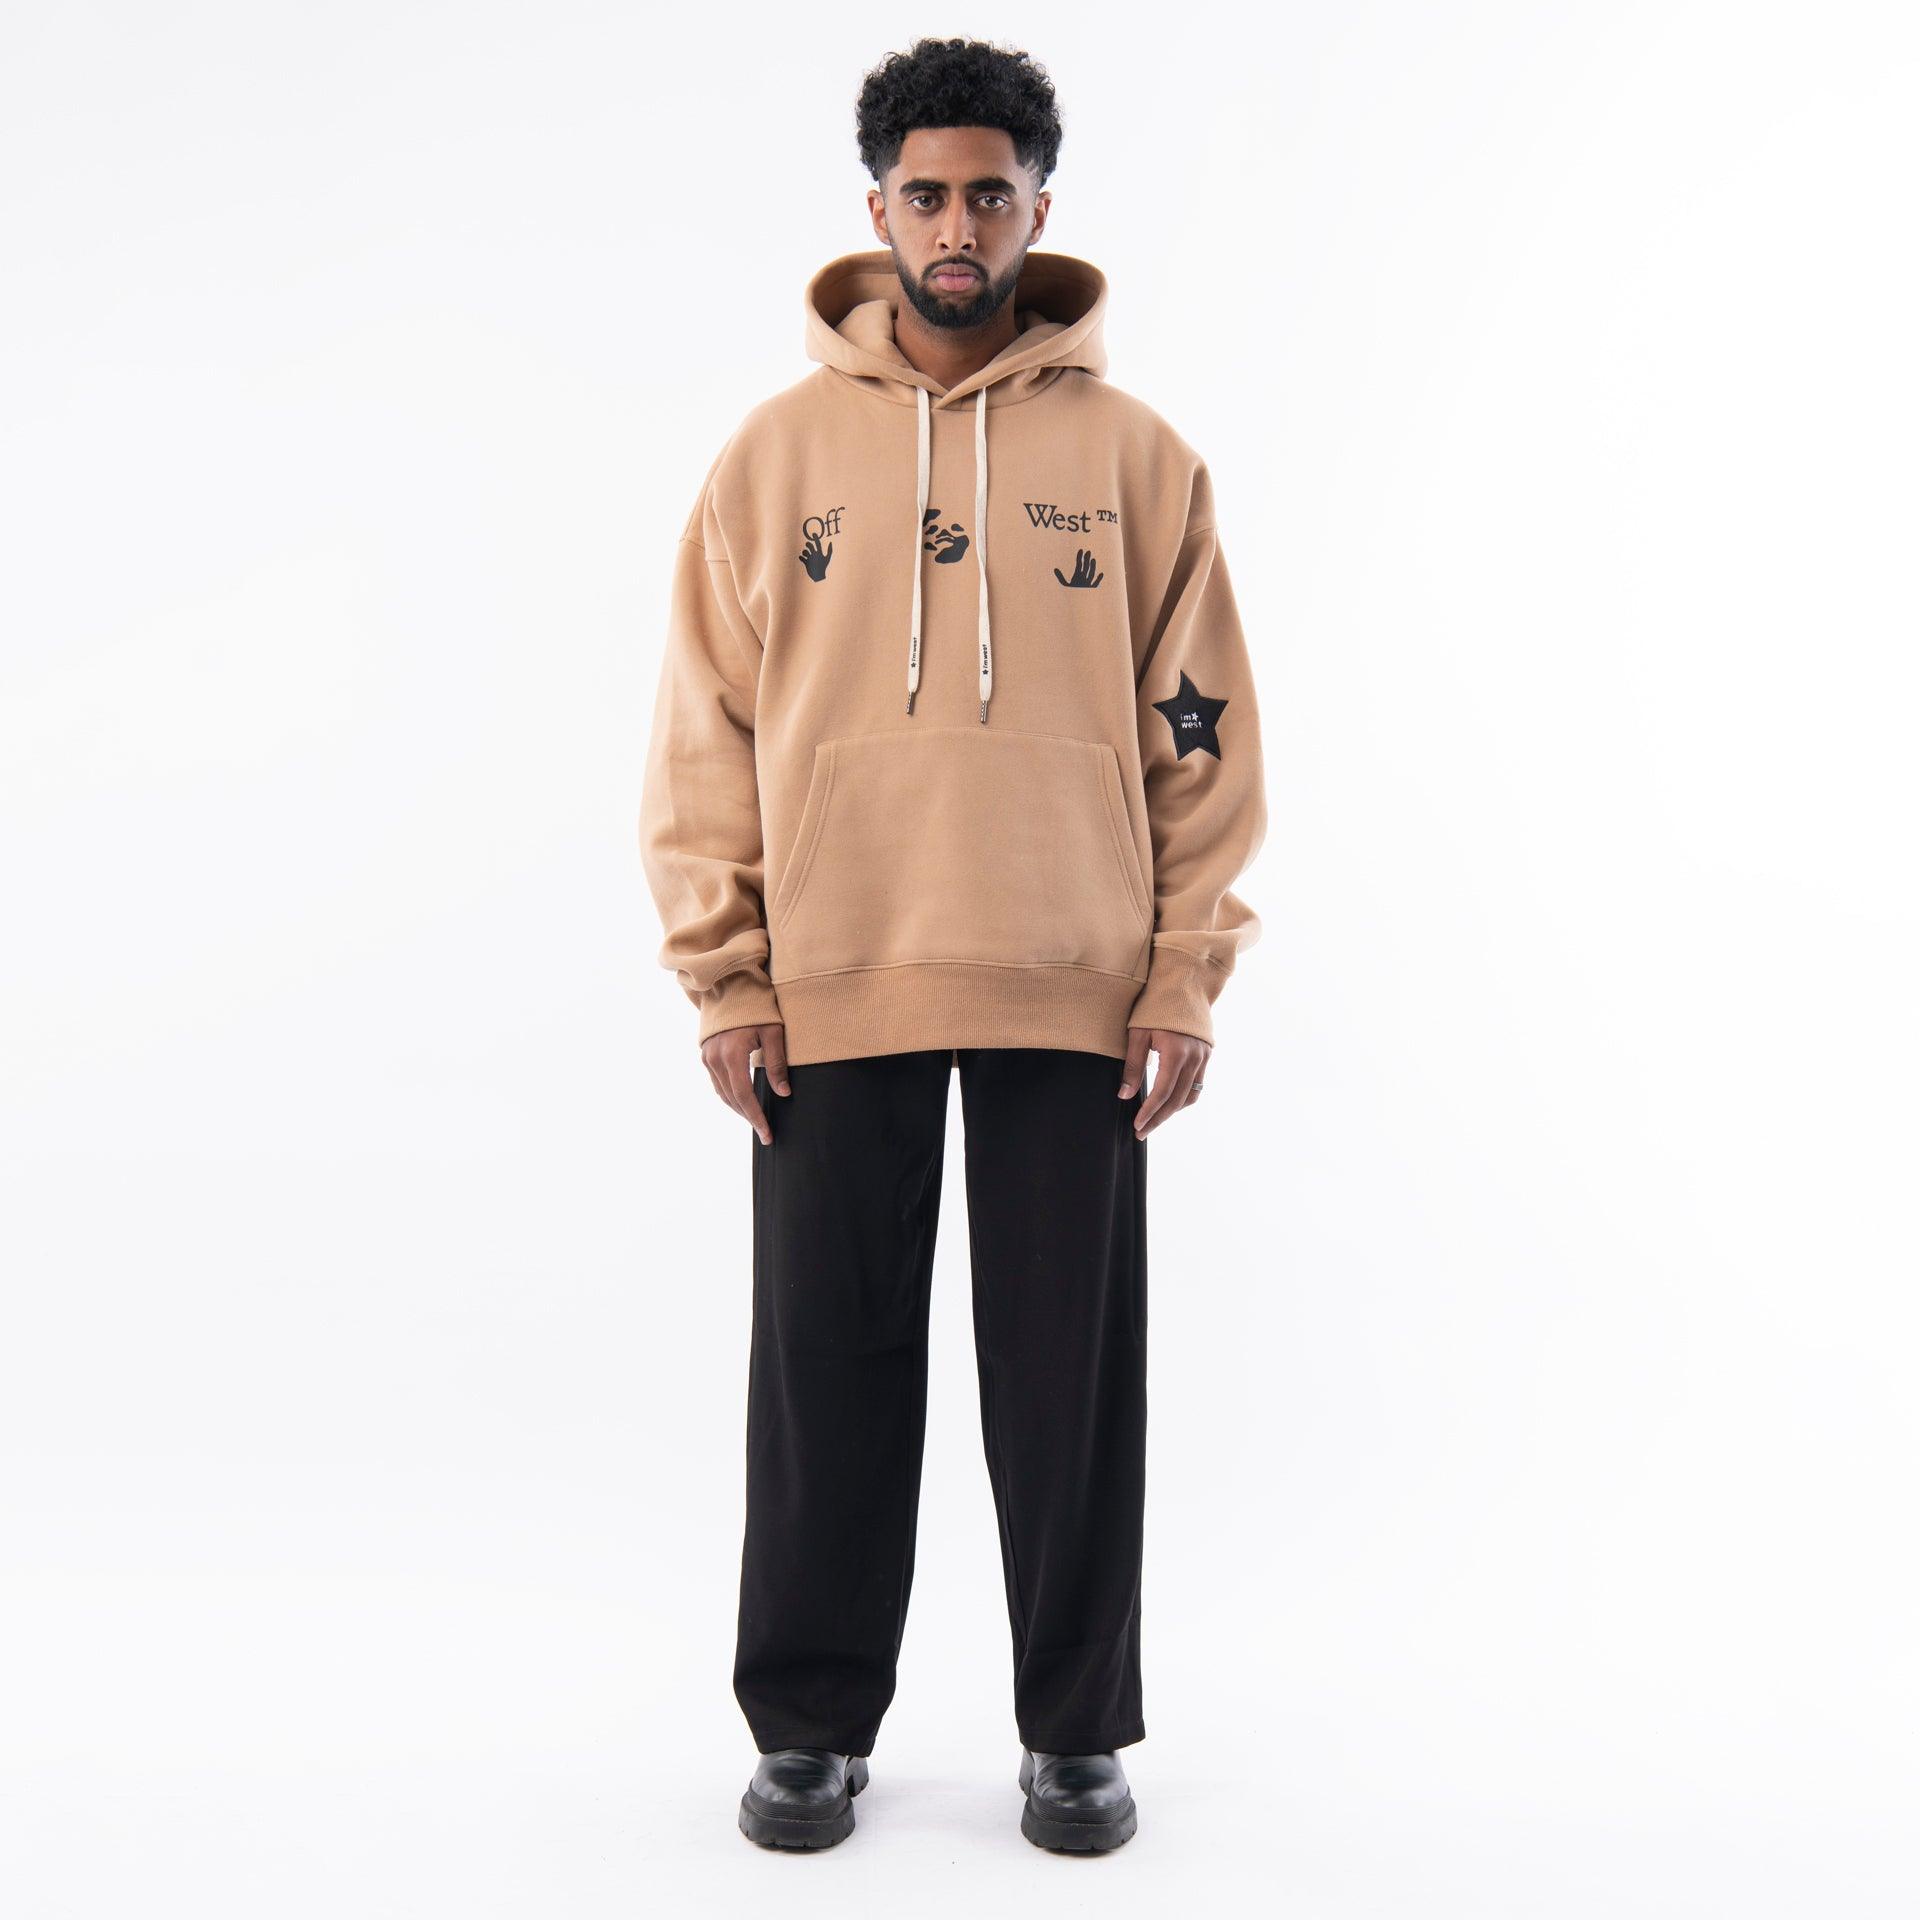 Beige Fake Hoodie From I'm West - WECRE8